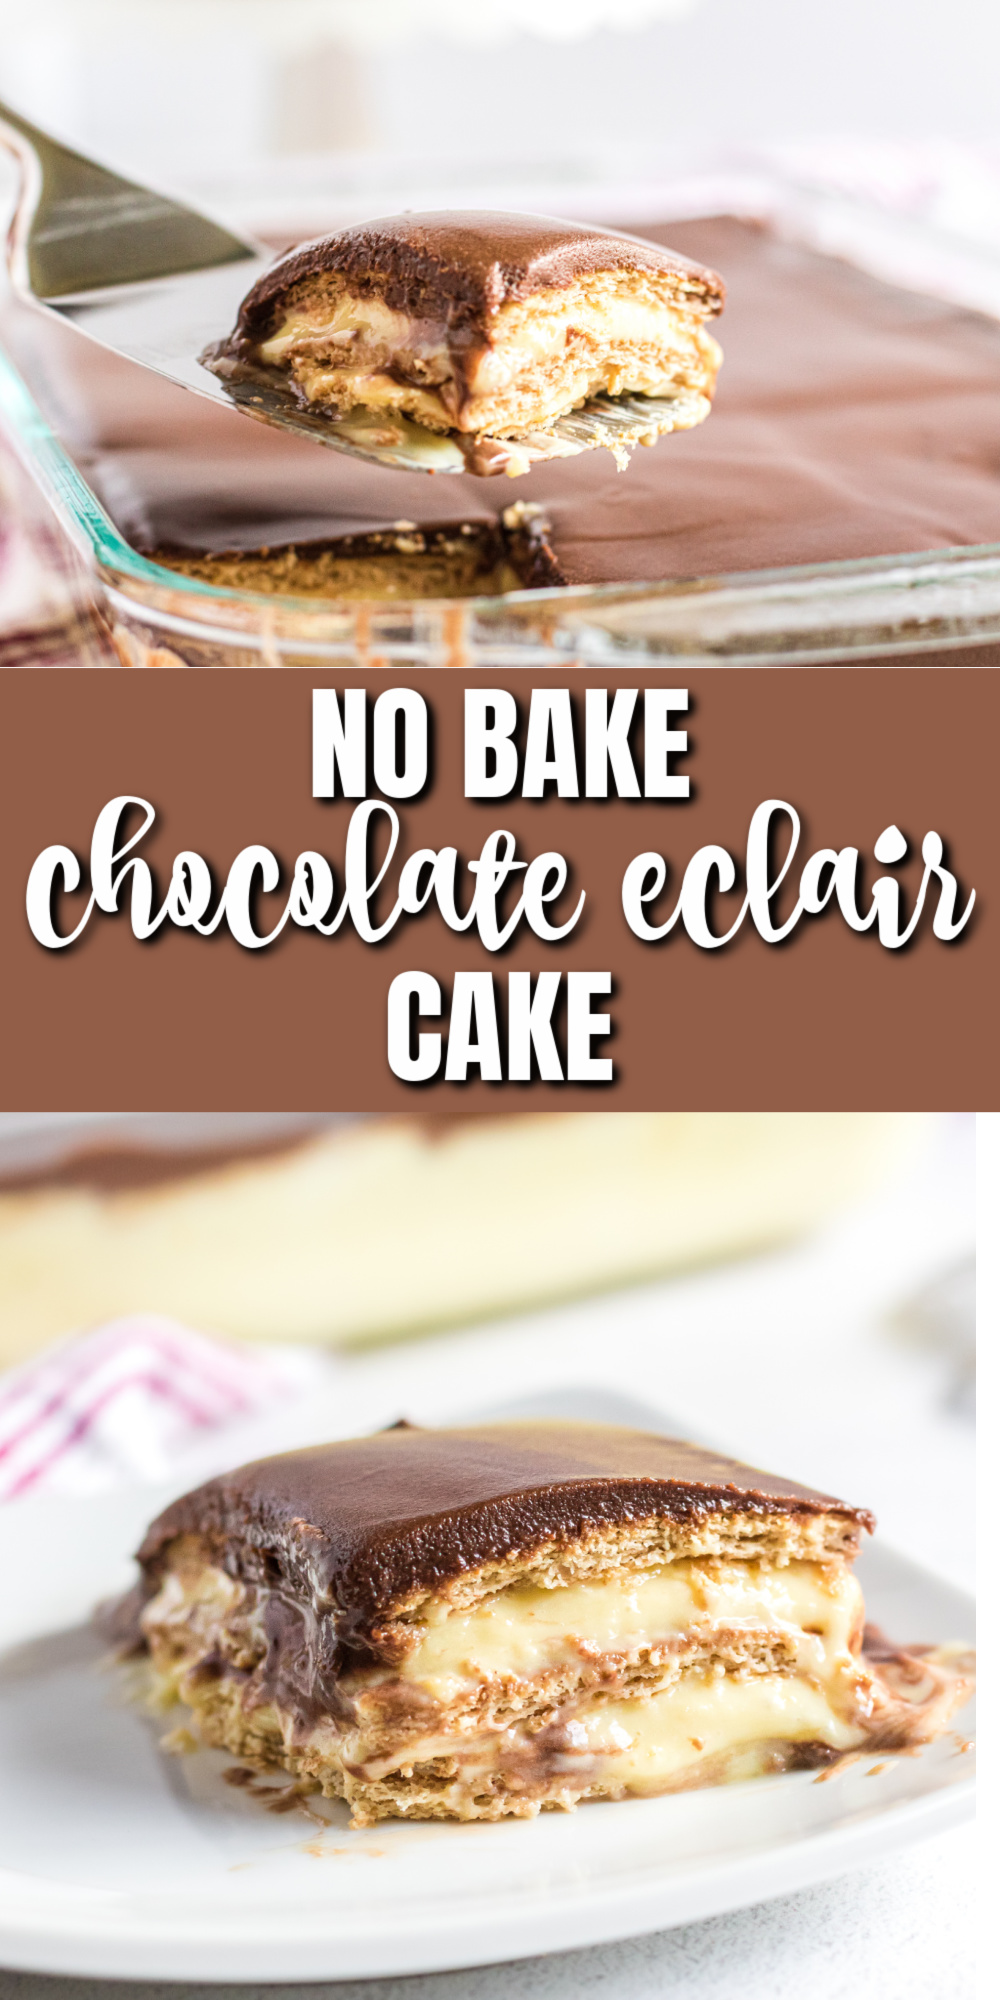 This No Bake Chocolate Eclair Cake is a delicious and easy dessert that's perfect for any time of the year. Made with layers of graham crackers, pudding, and more. If you love simple no bake desserts, this is the best and perfect for family gatherings.